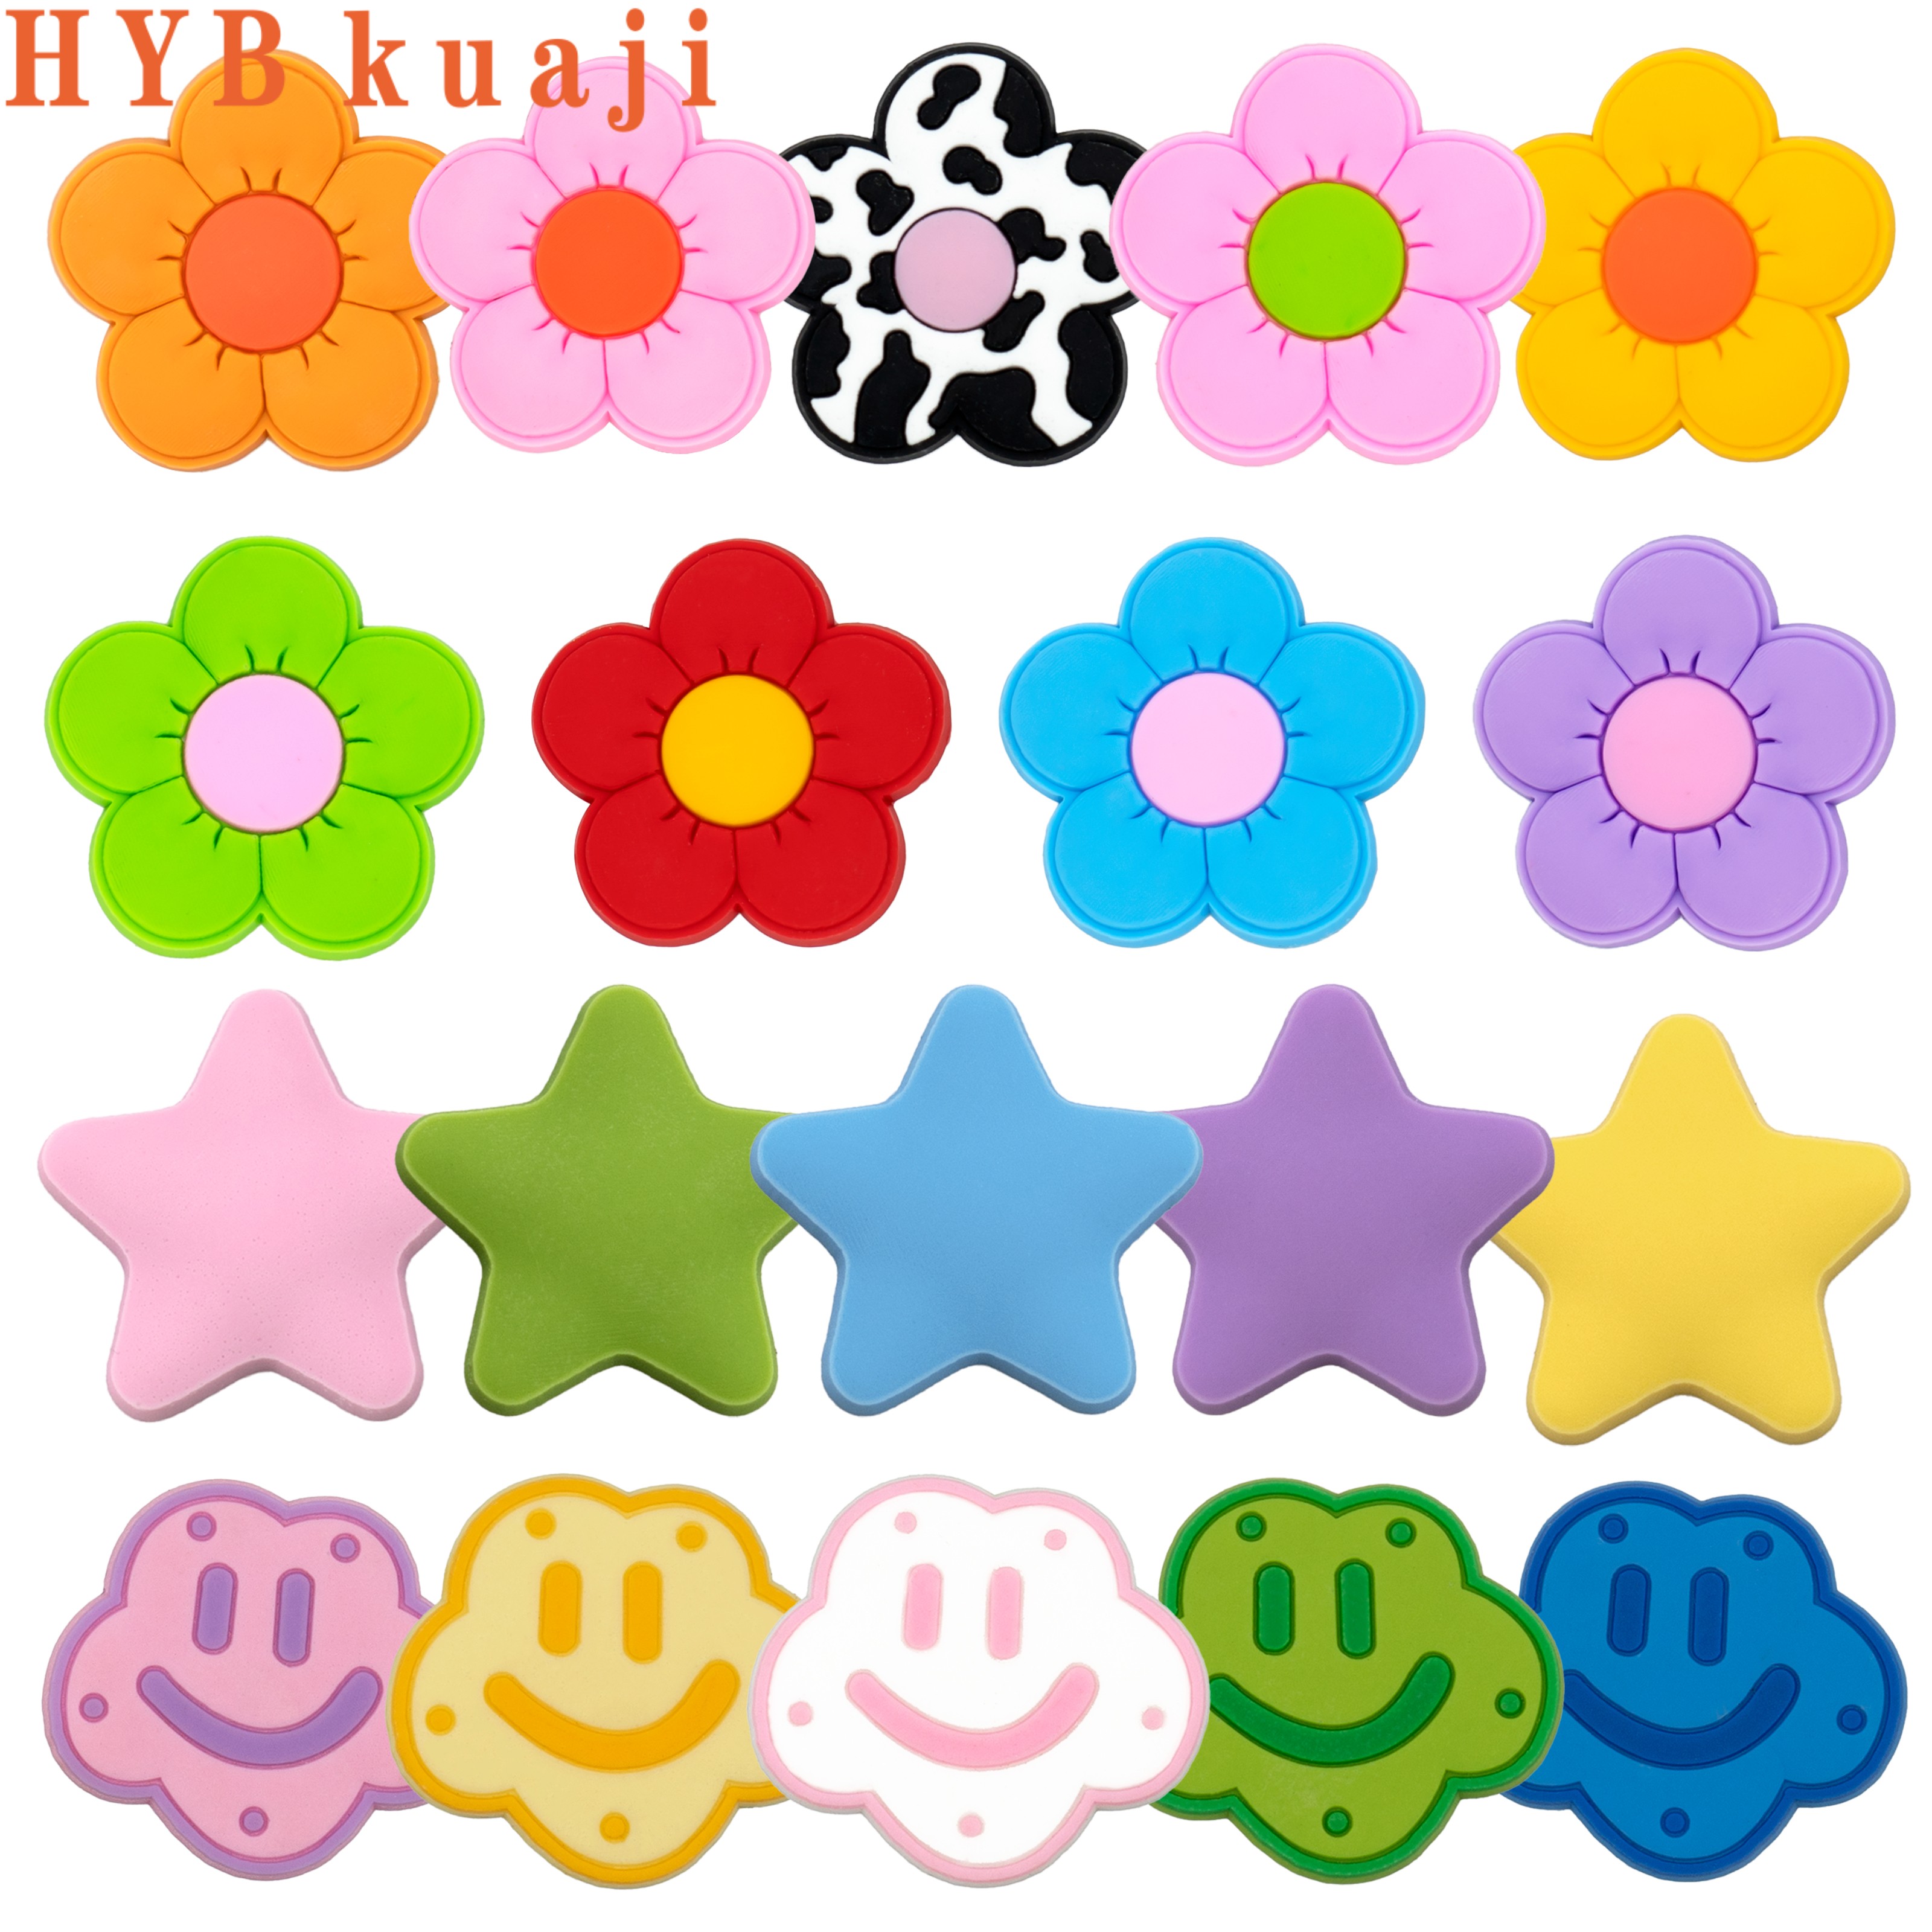 HYBkuaji 100pcs small flowers shoe charms wholesale shoes decorations shoe clips pvc buckles for shoes